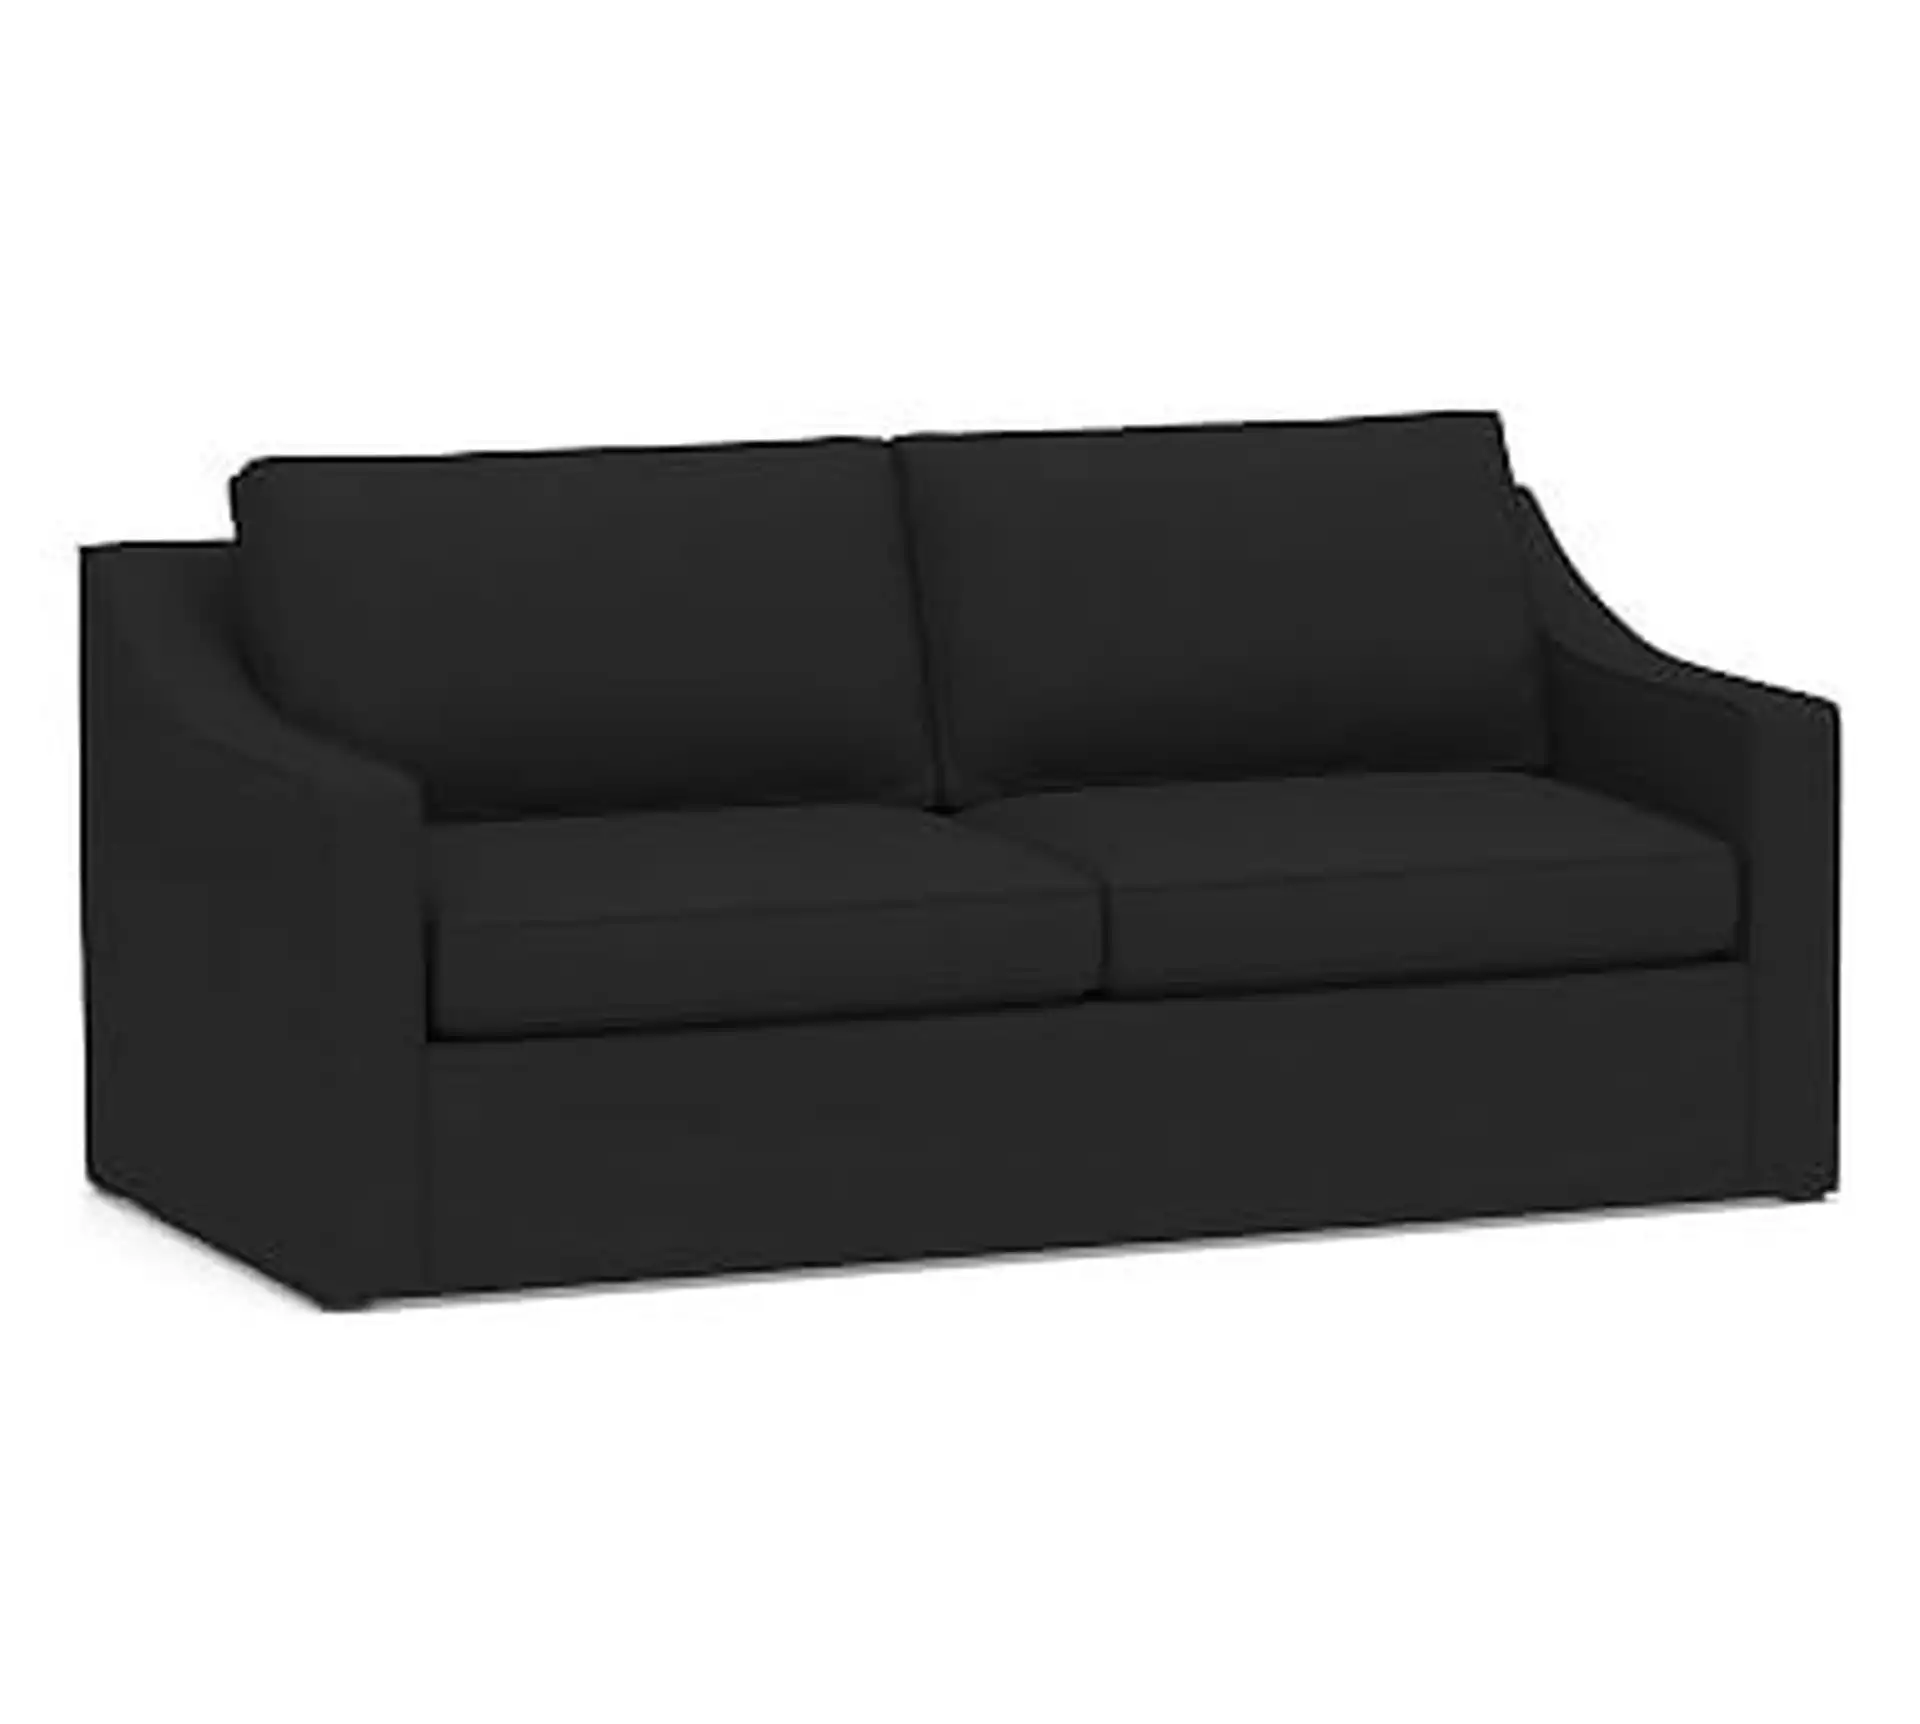 Cameron Slope Arm Slipcovered Deep Seat Sofa 2-Seater 85", Polyester Wrapped Cushions, Textured Basketweave Black